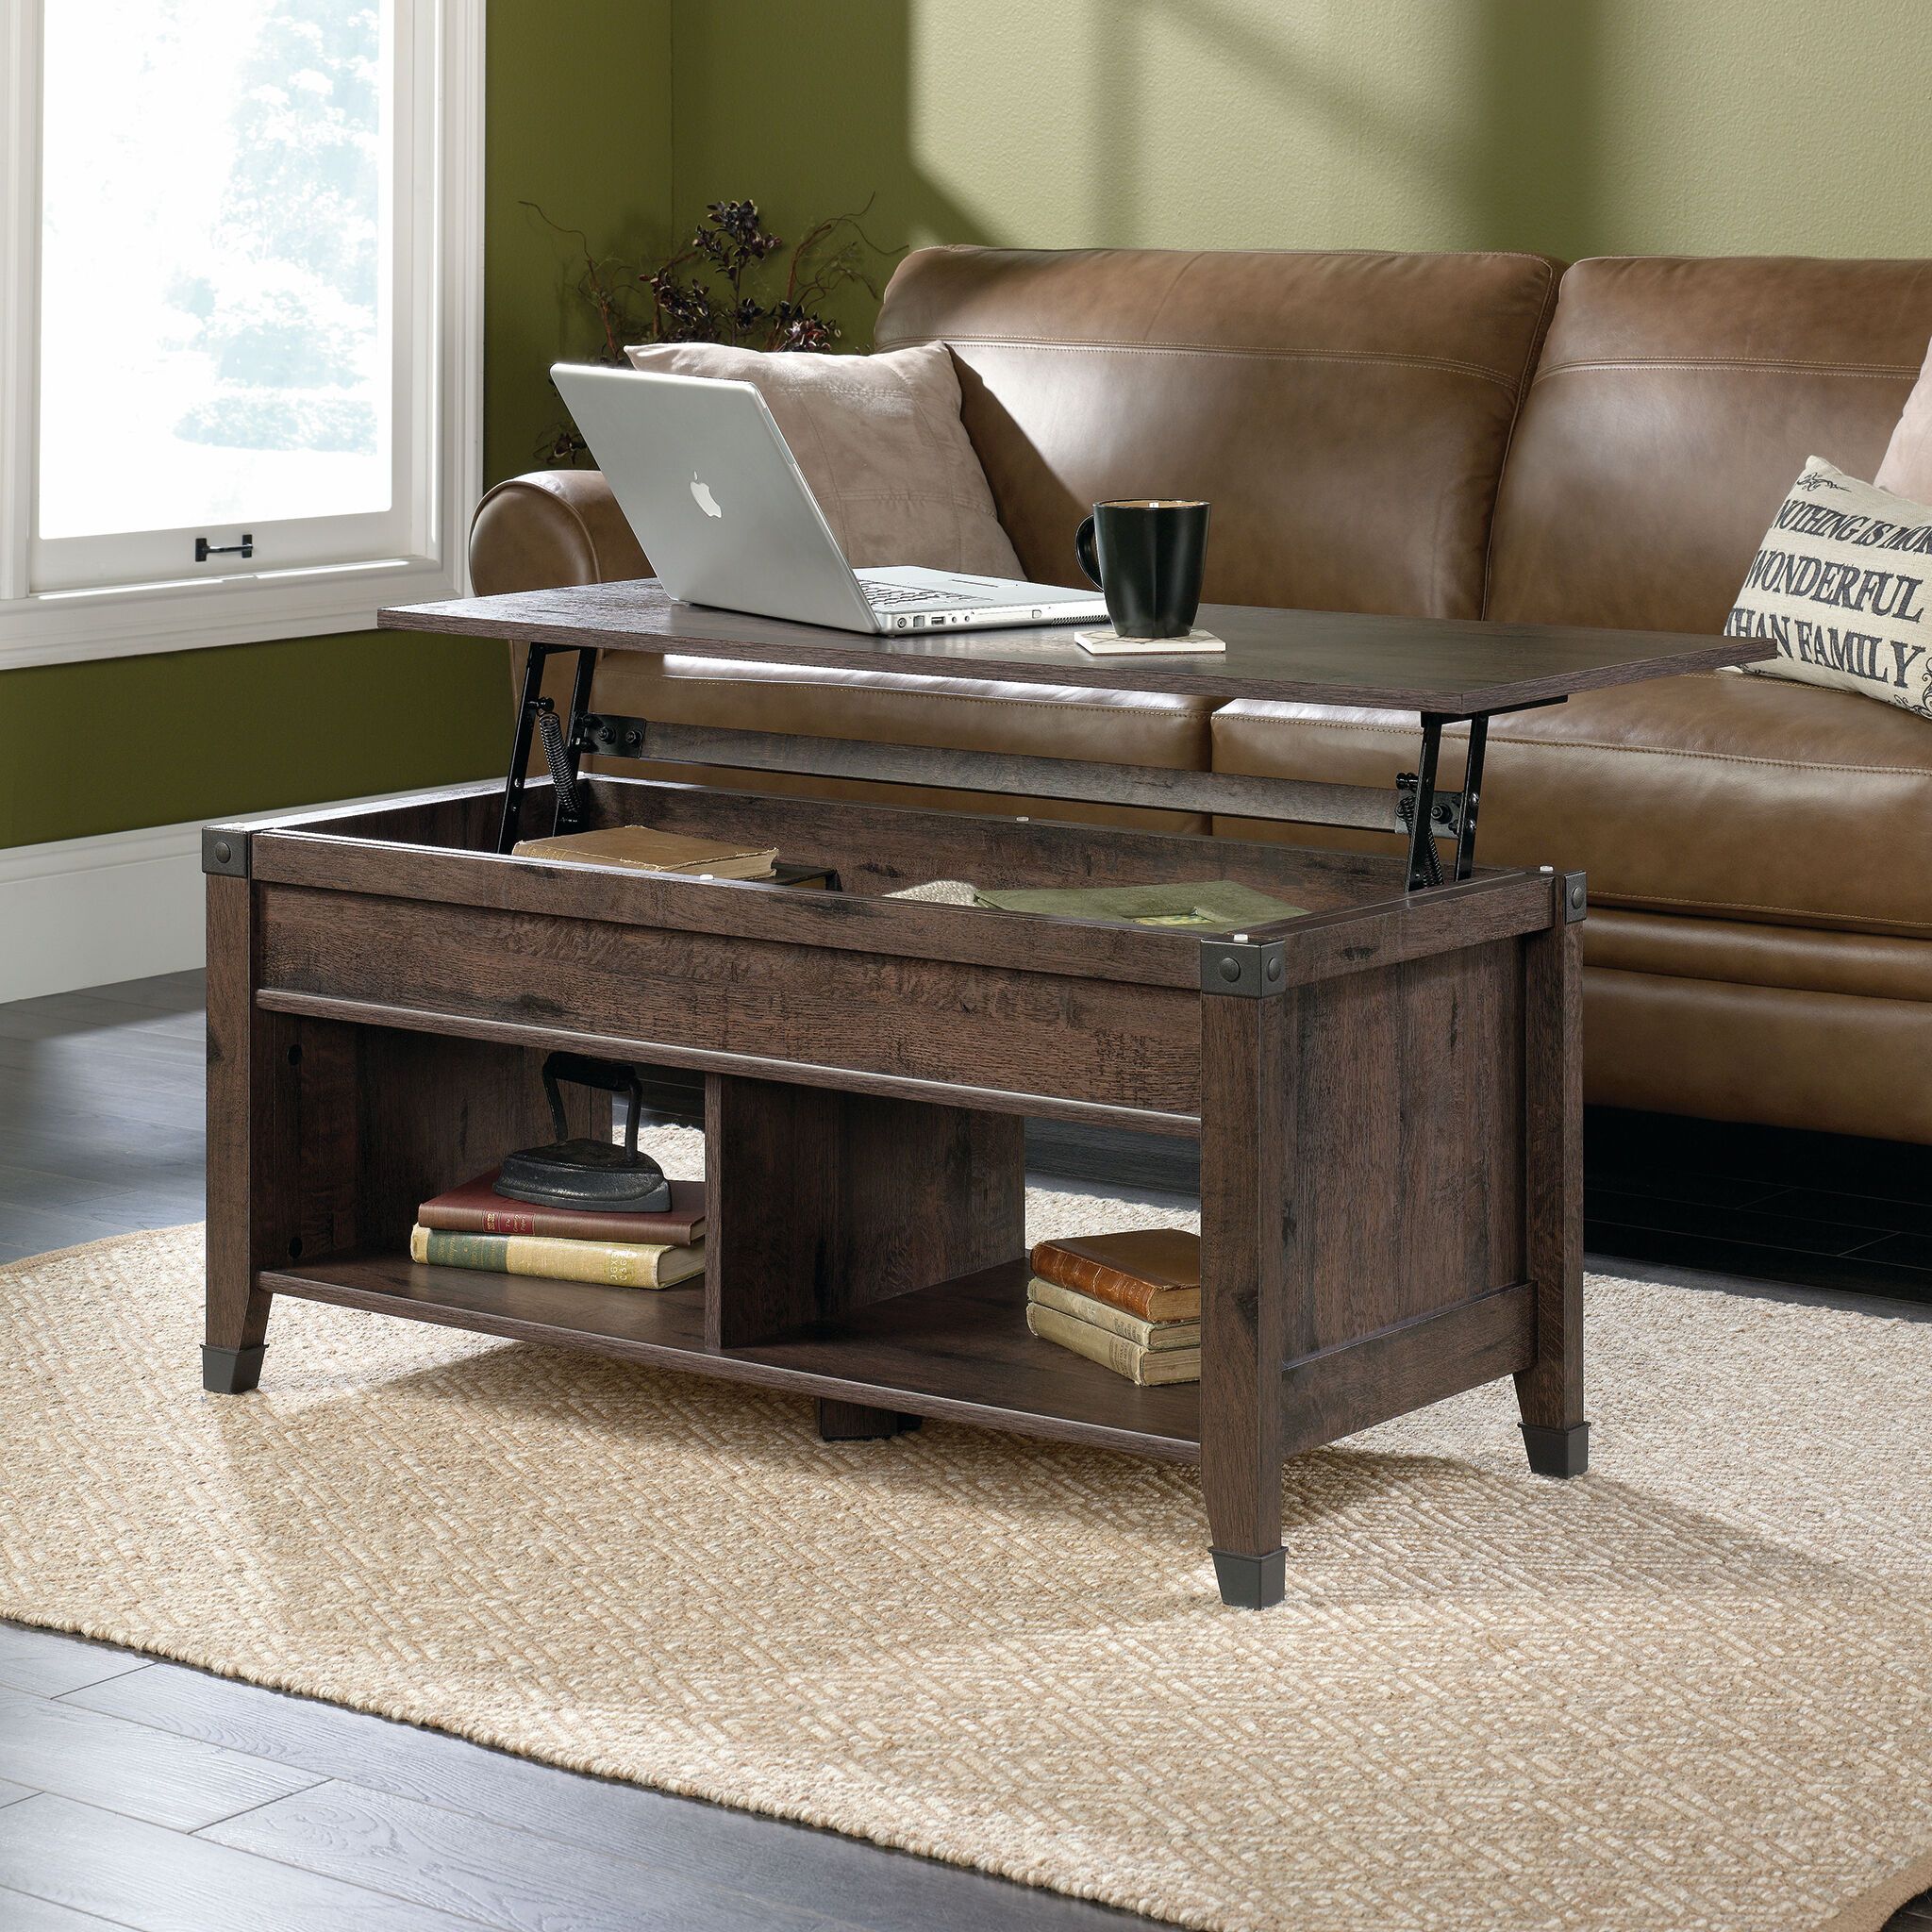 Rectangular Lift Top Contemporary Coffee Table In Coffee Oak | Mathis Throughout Modern Wooden Lift Top Tables (View 4 of 15)